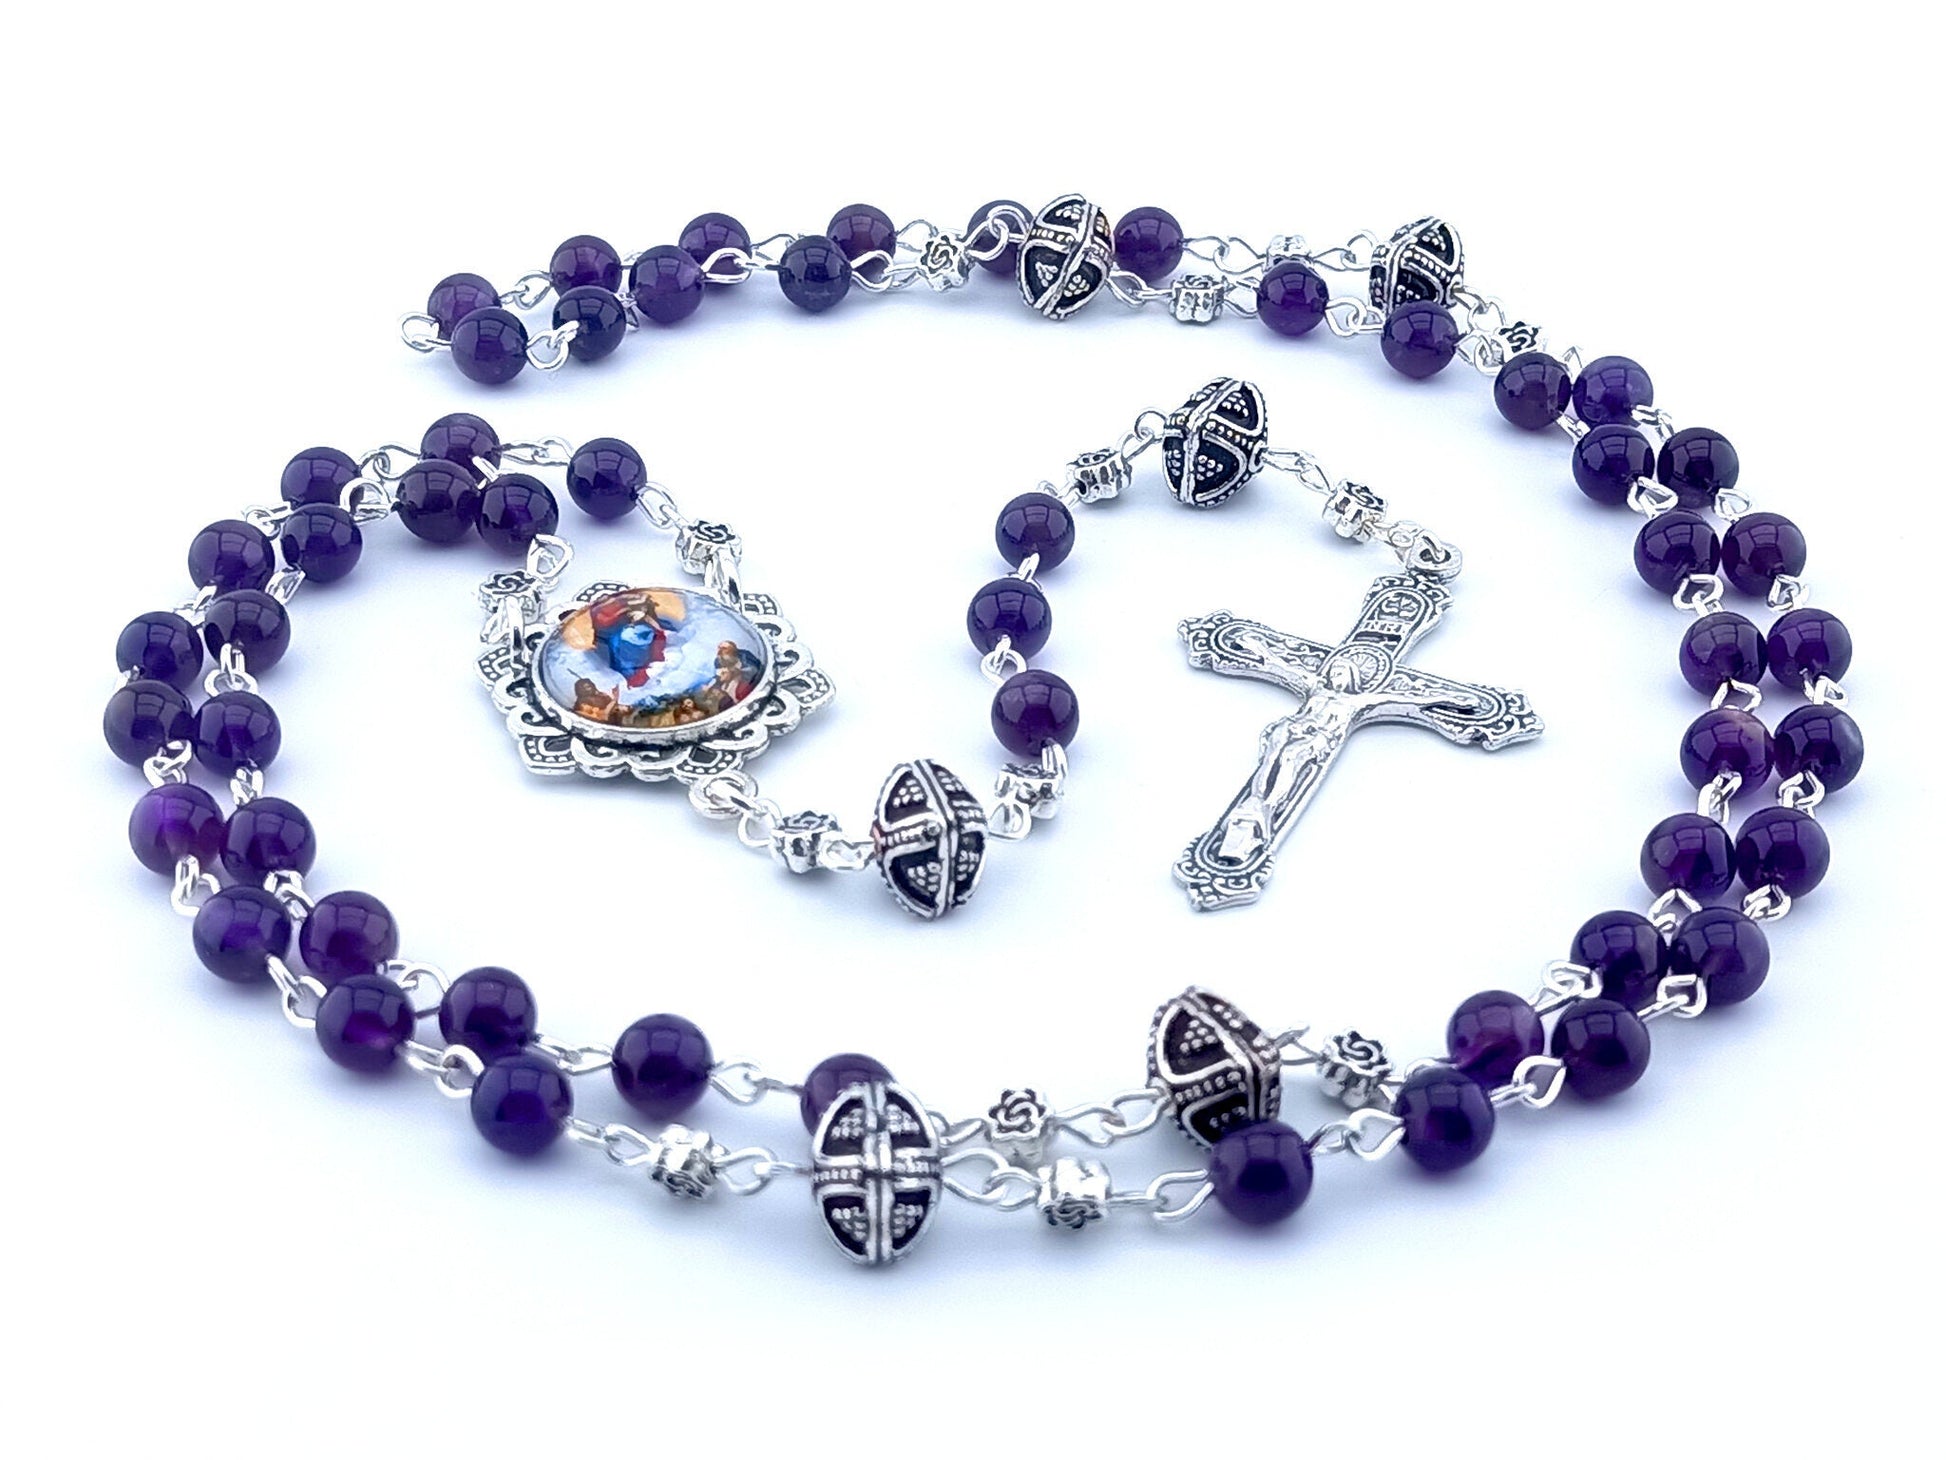 Our Lady Queen of Heaven unique rosary beads with purple amethyst gemstone beads, silver crucifix, picture centre medal, pater beads and linking beads.